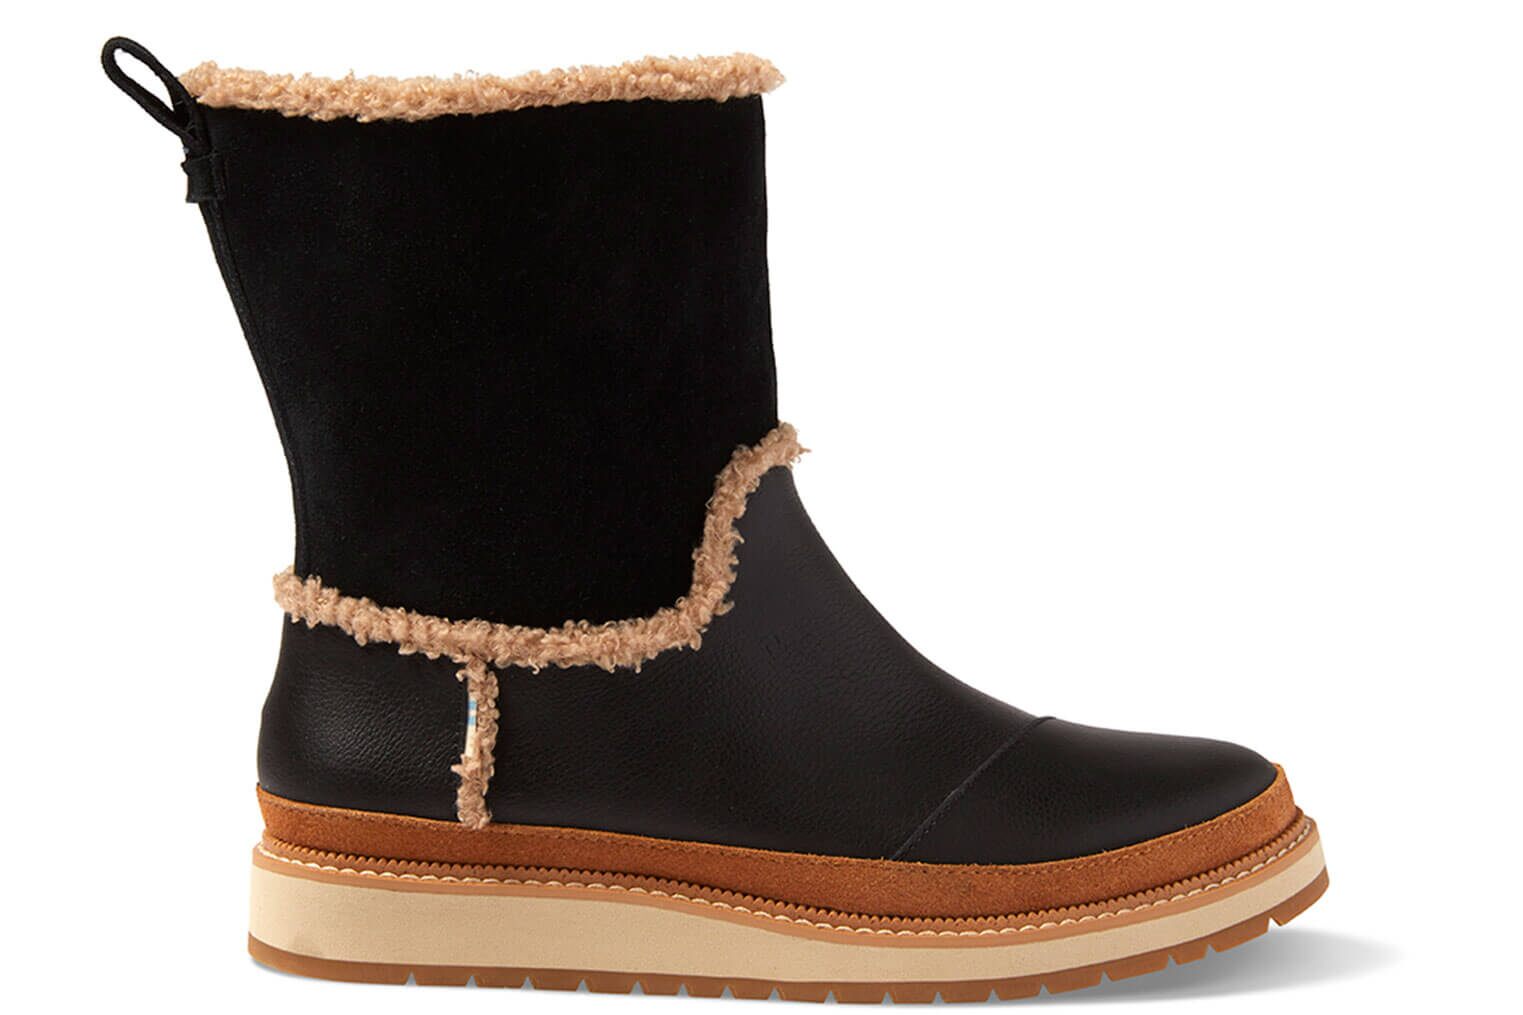 toms suede boots womens